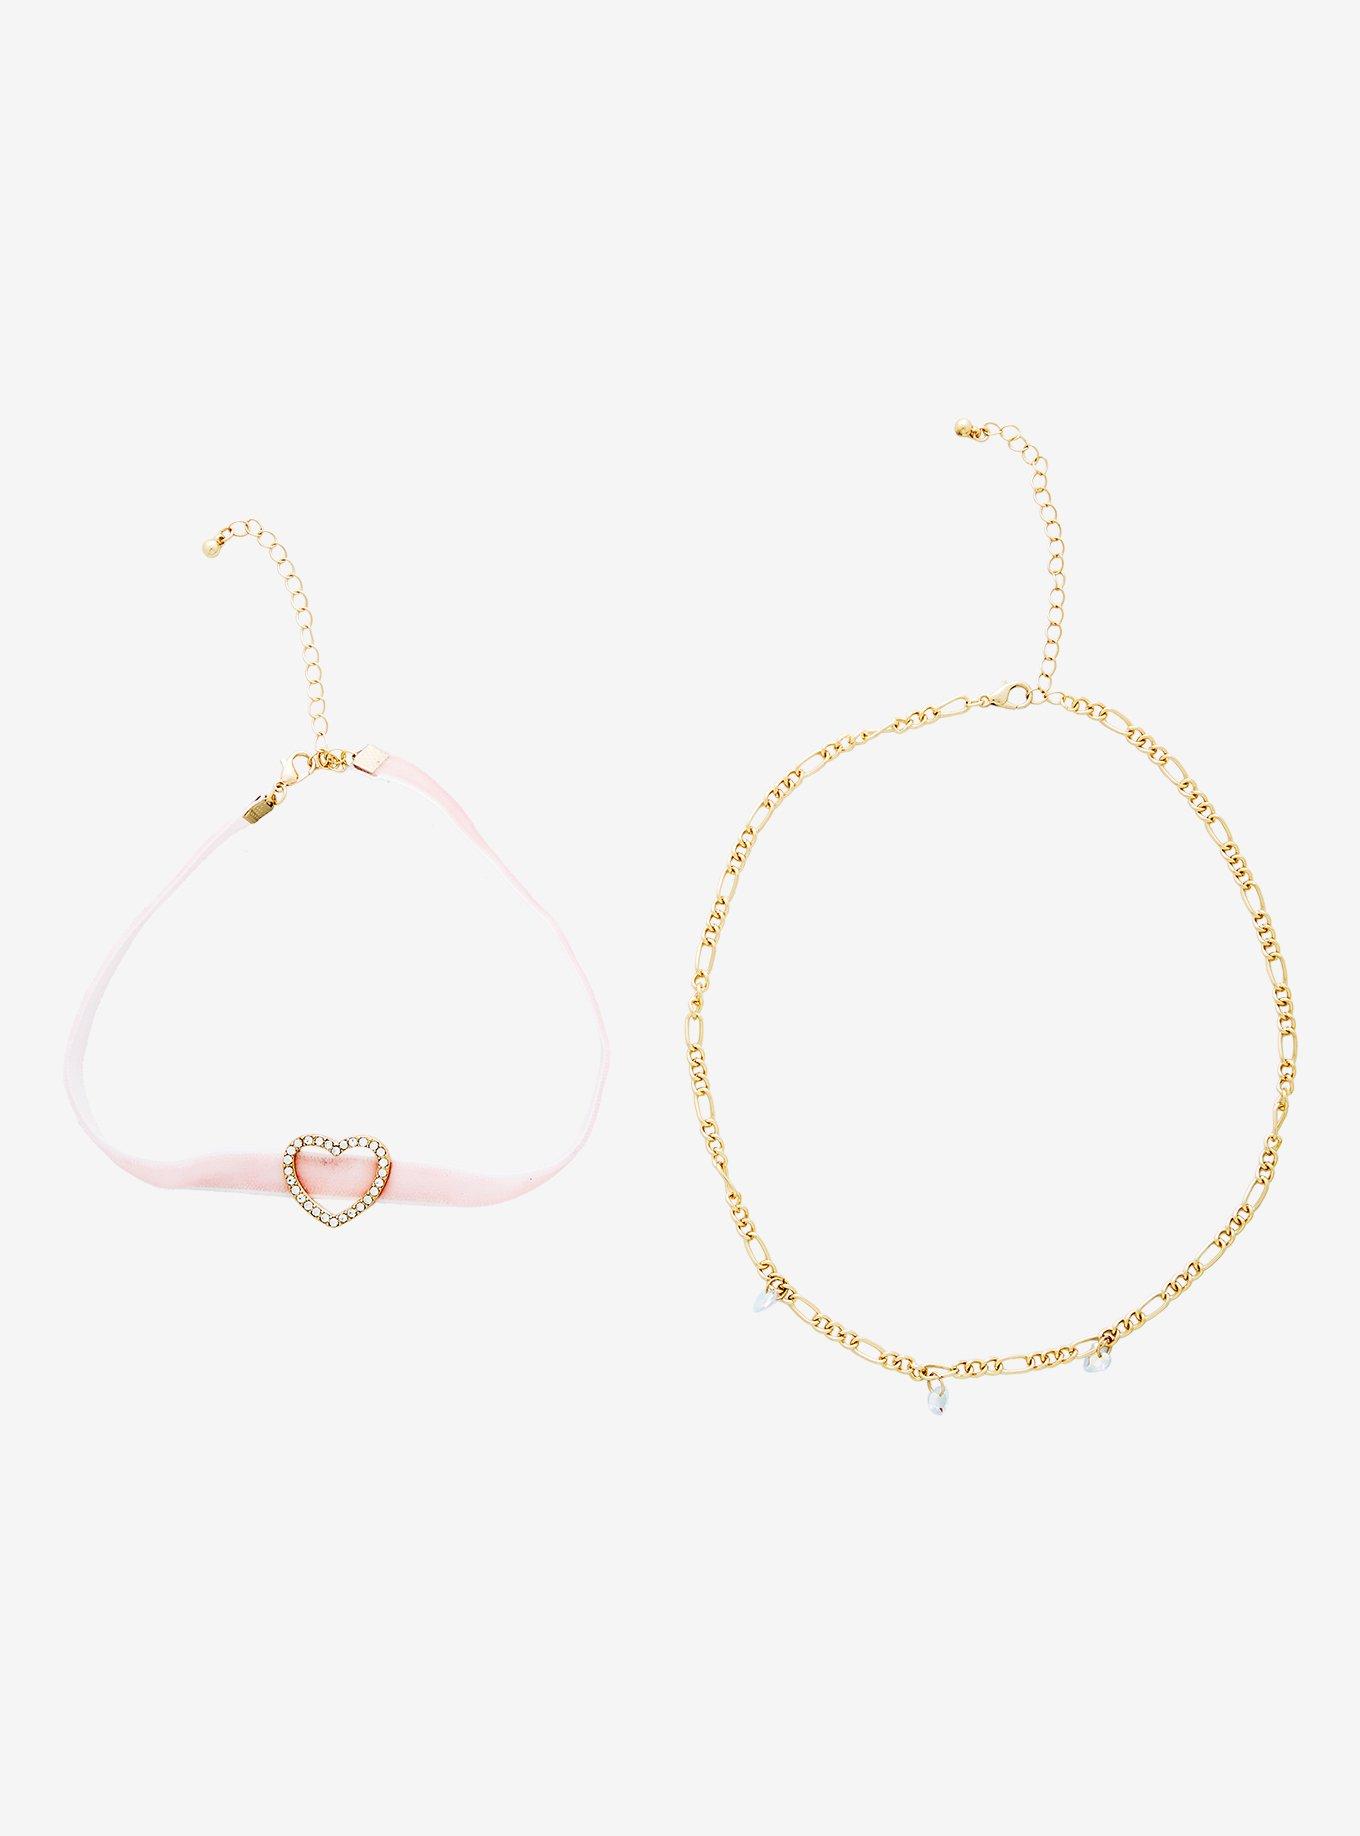 Bling Heart Chain Necklace Set, , hi-res